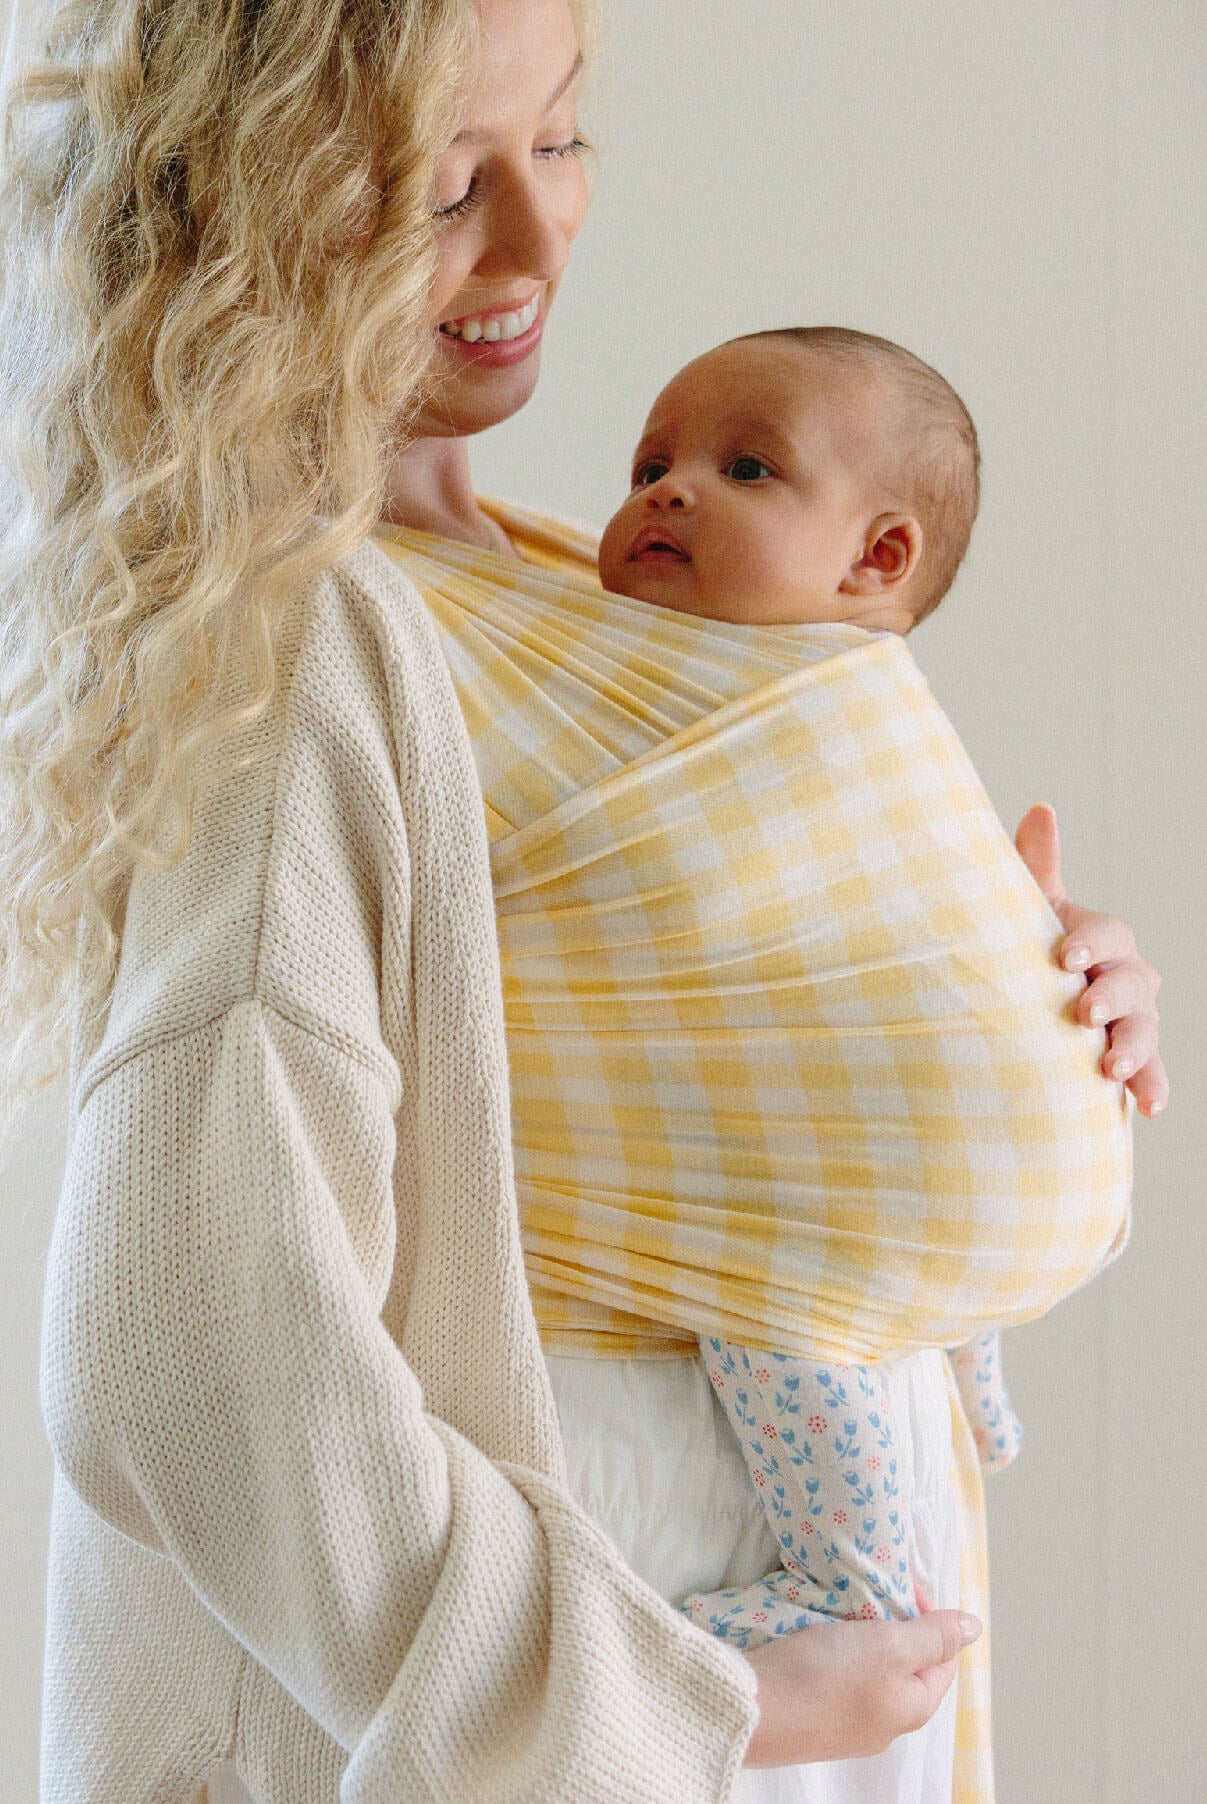 Mother with blond wavy hair smiles down at baby in a yellow gingham Solly wrap